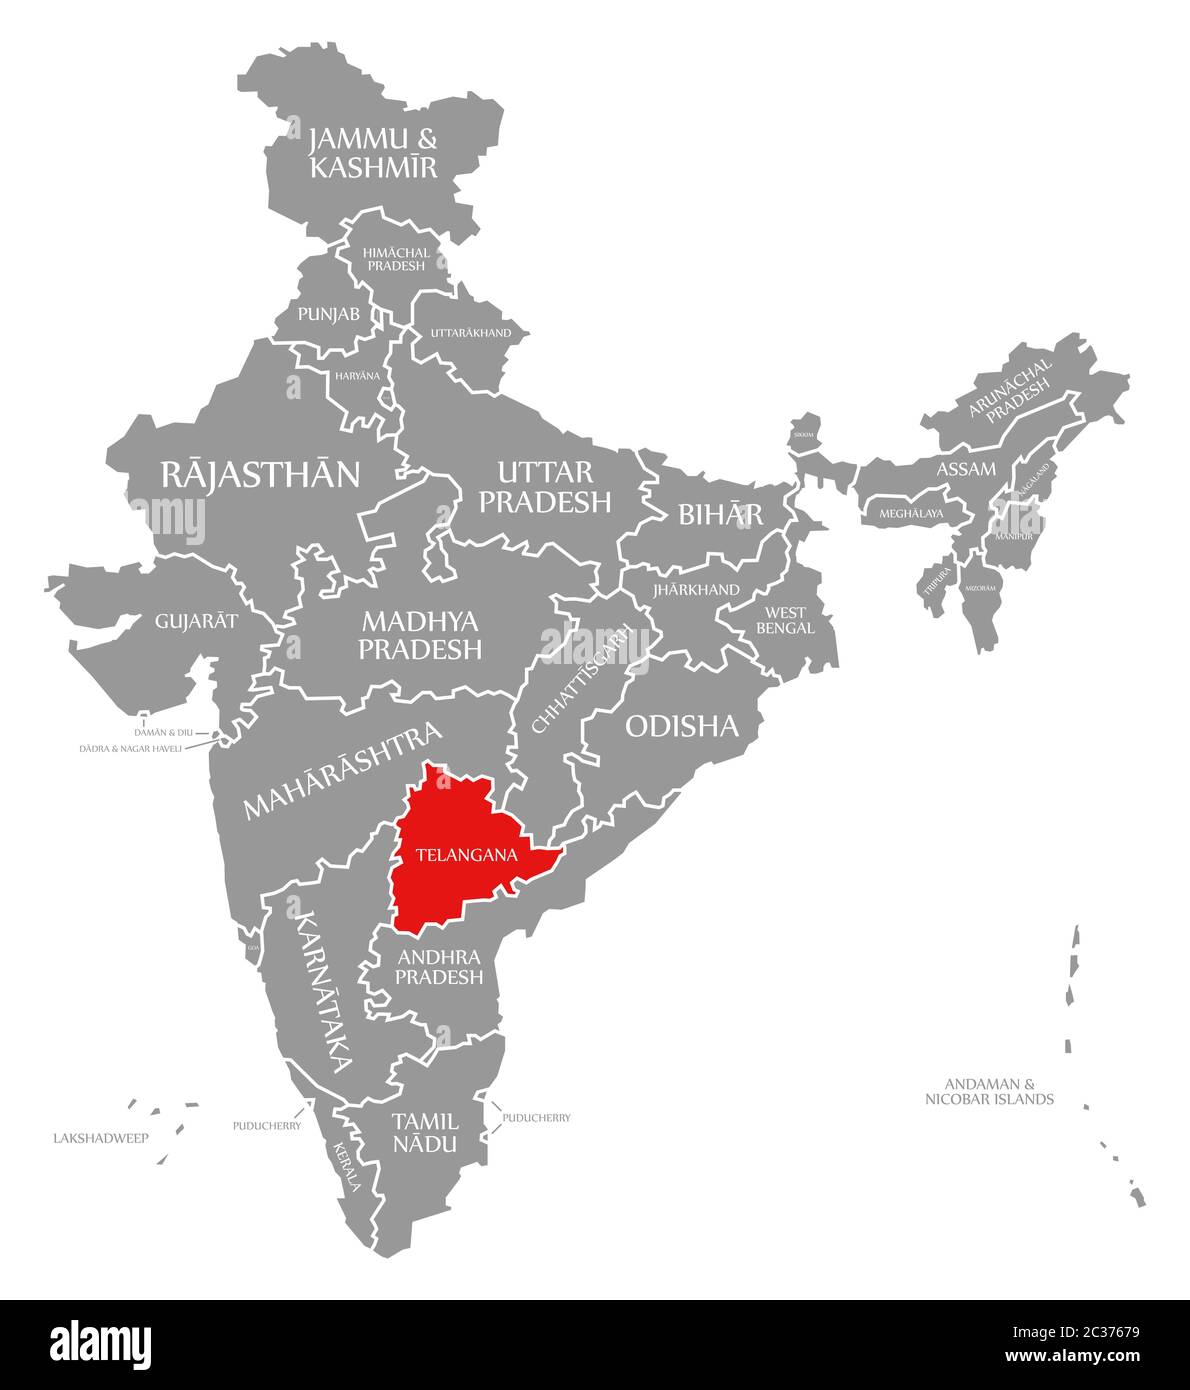 Telangana red highlighted in map of India Stock Photo